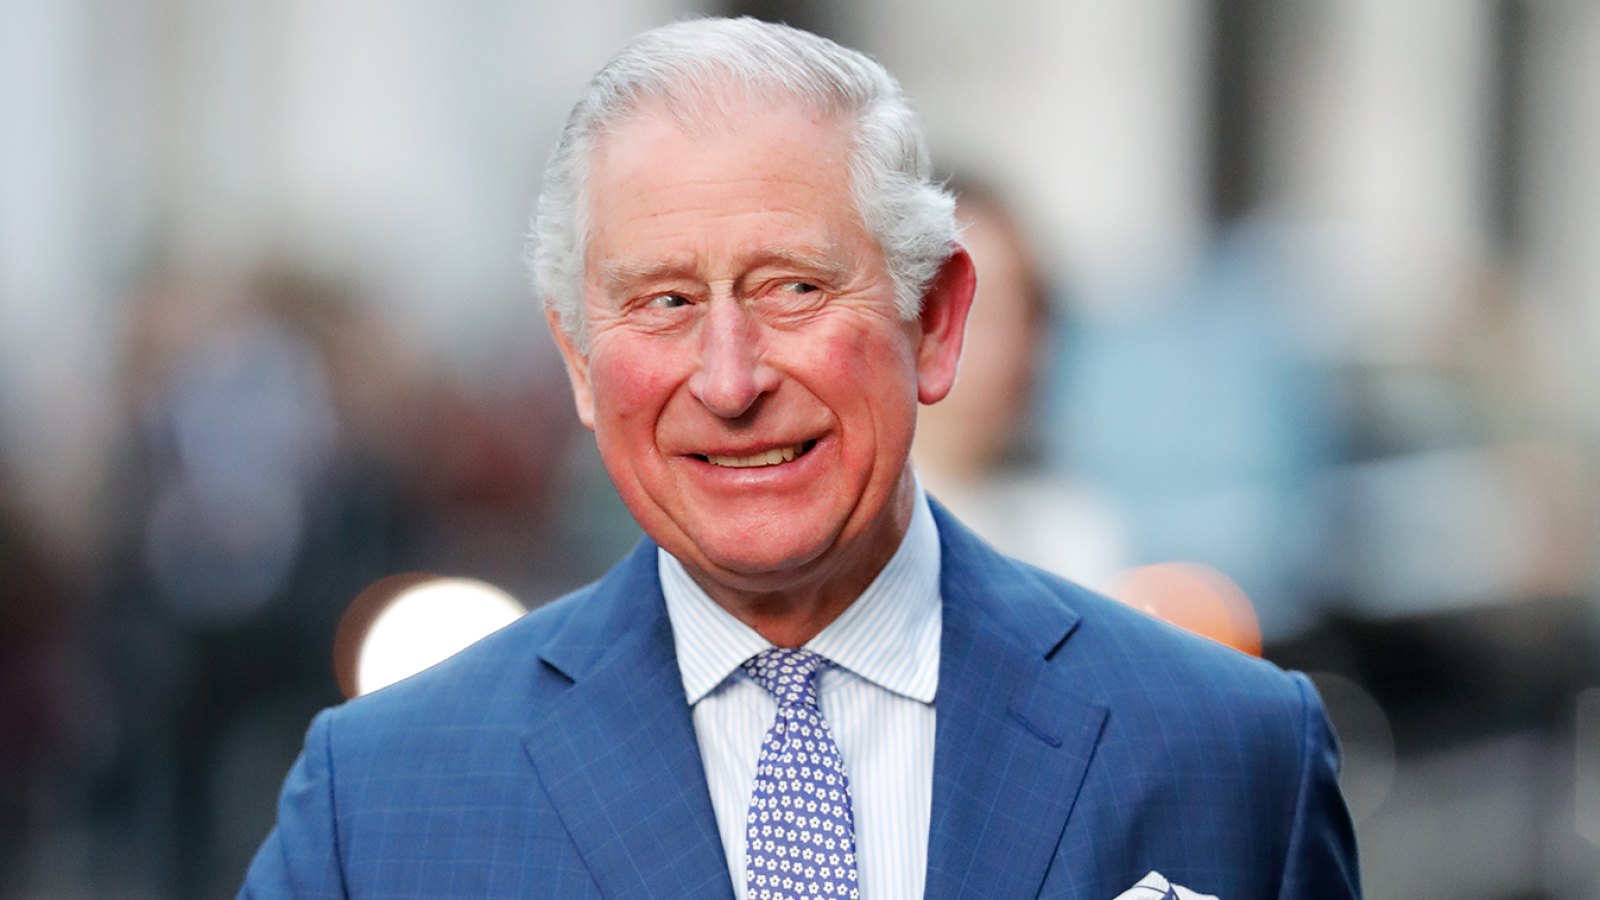 Prince Charles Jokes About the Duke and Duchess of Sussex' Baby Name